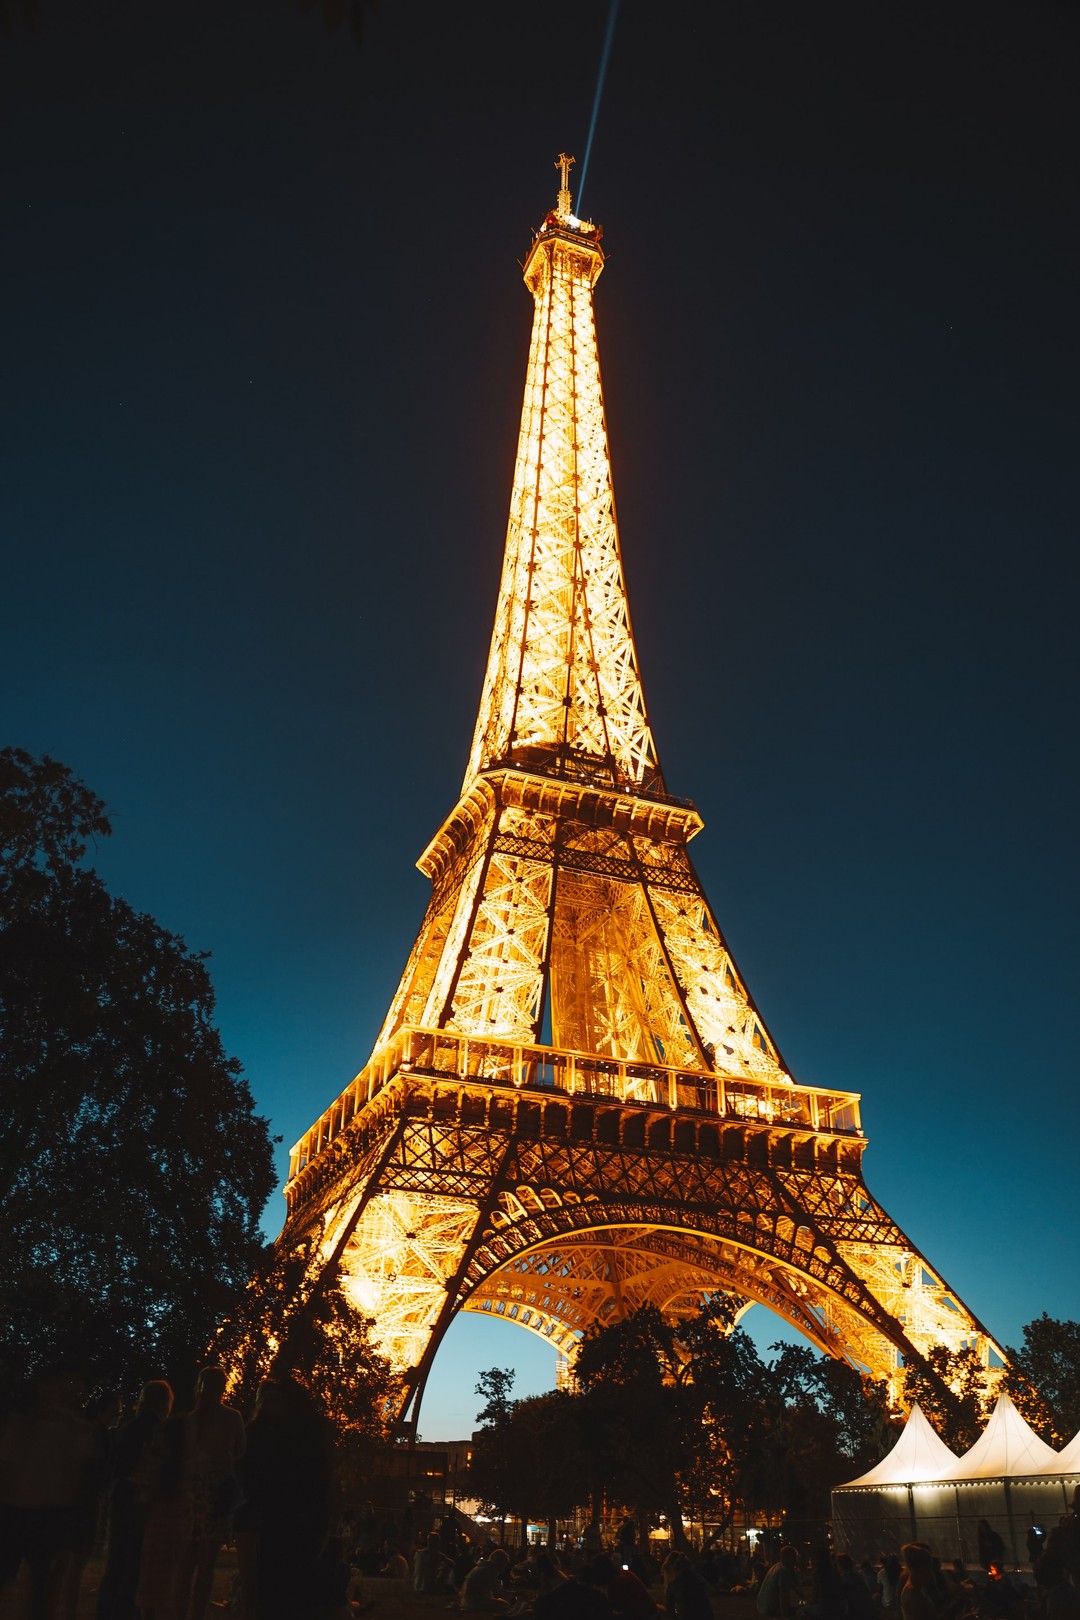 The Eiffel Tower, Paris, France: One of the best romantic getaways for couples who love culture.